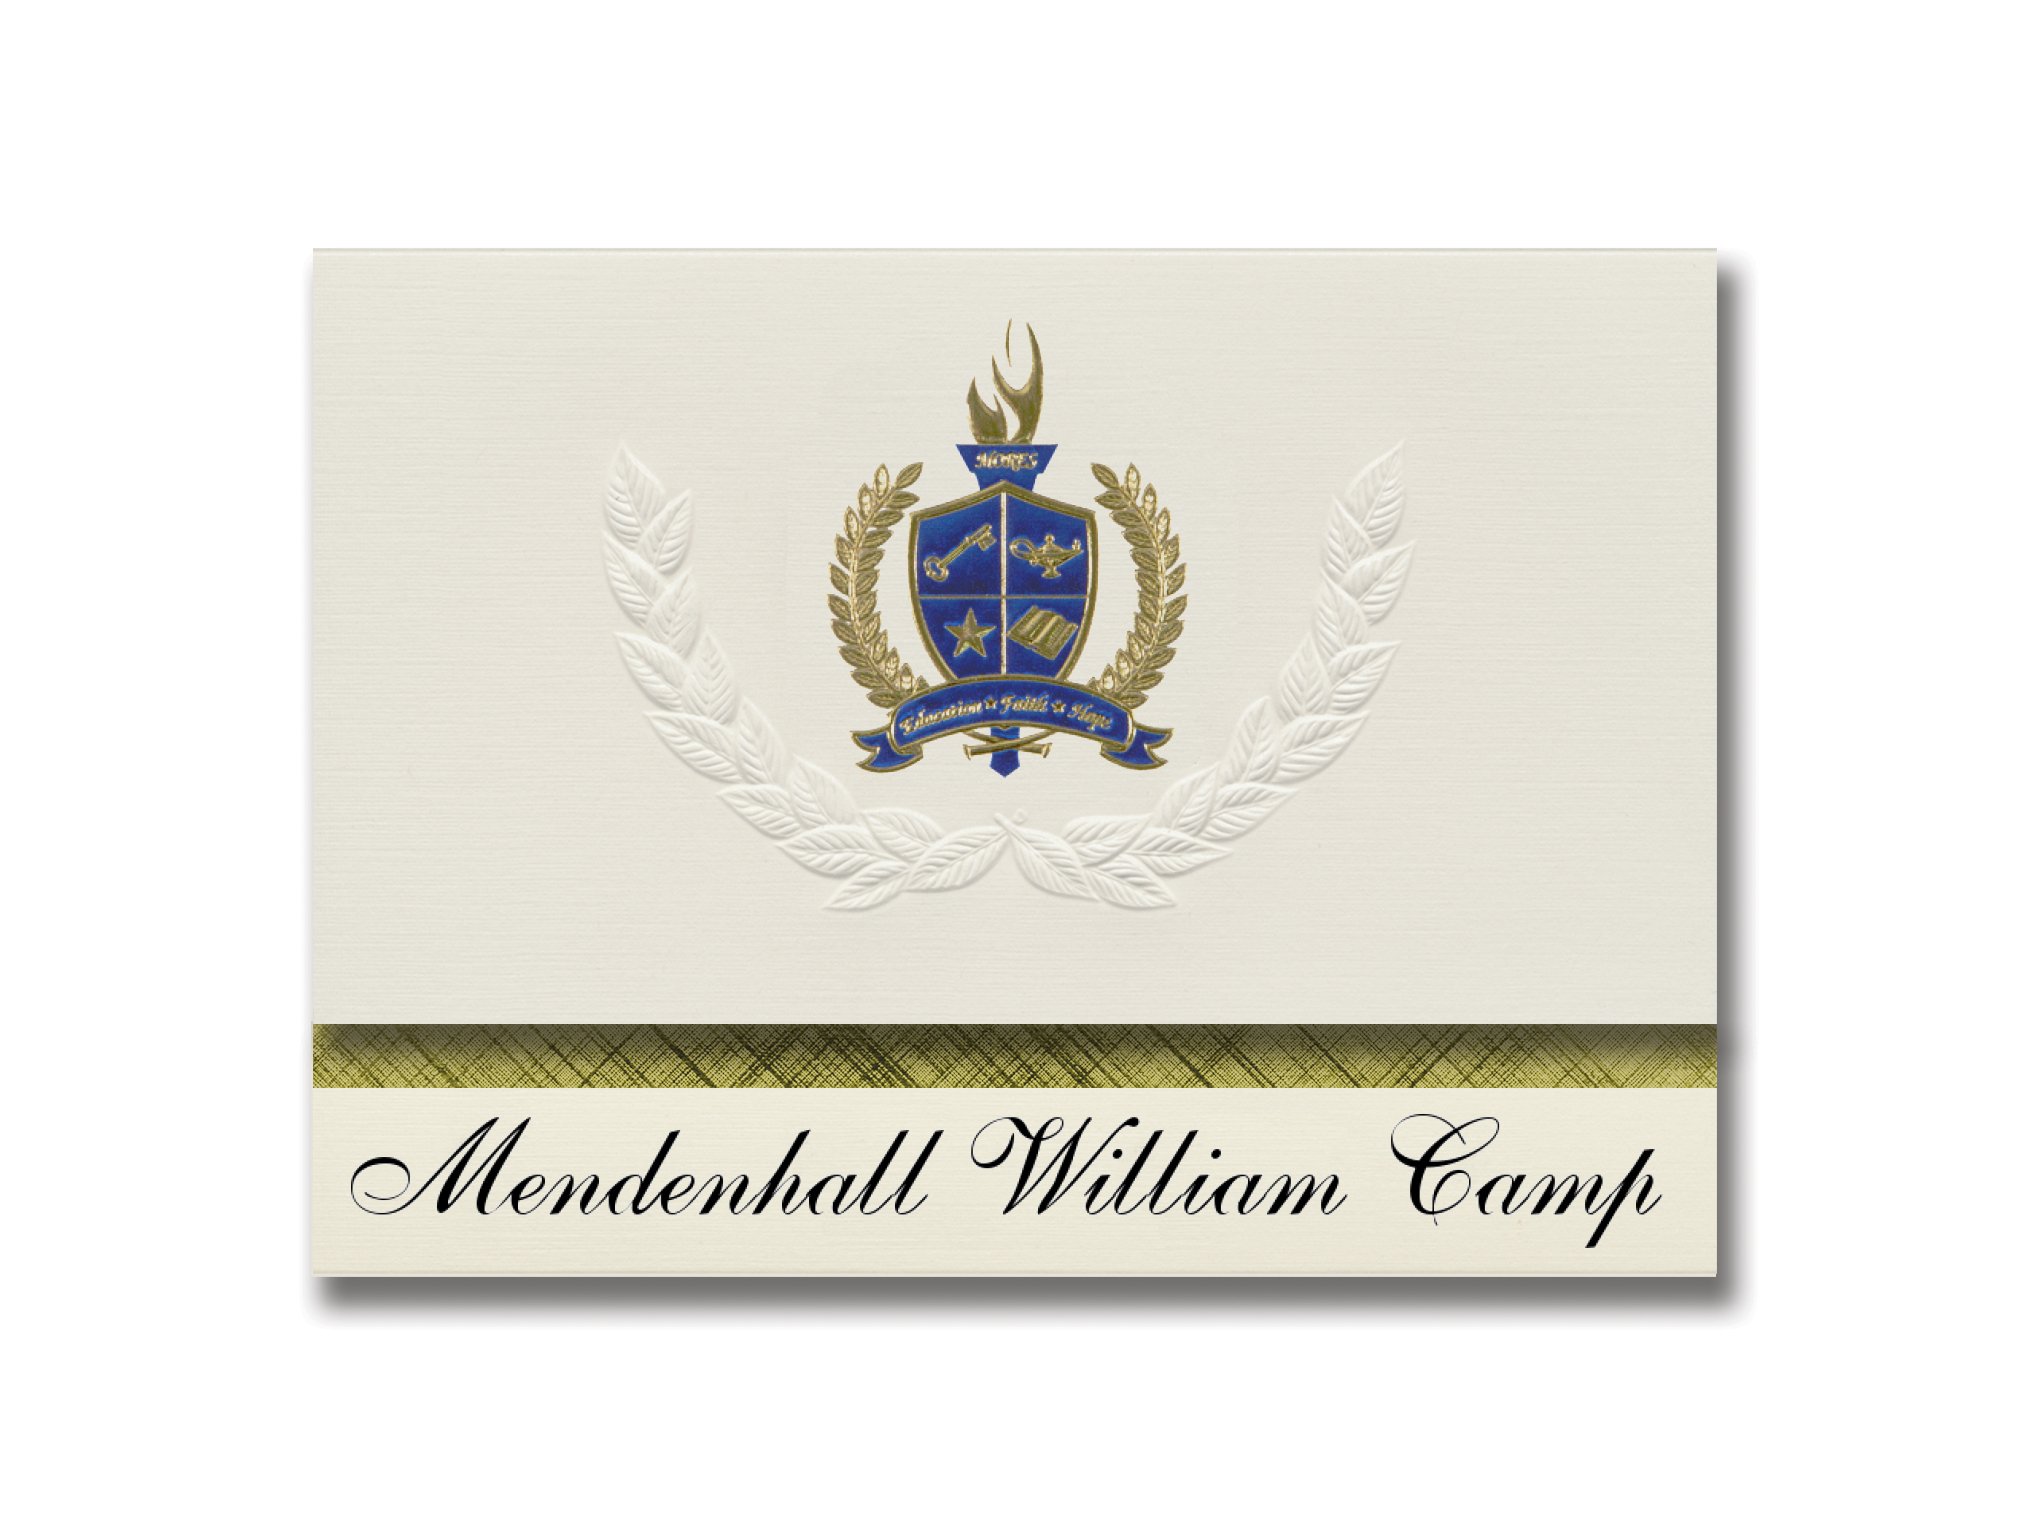 Signature Announcements Mendenhall William Camp (Lake Hughes, CA) Graduation Announcements, Presidential style, Basic package of 25 with Gold & Blu...